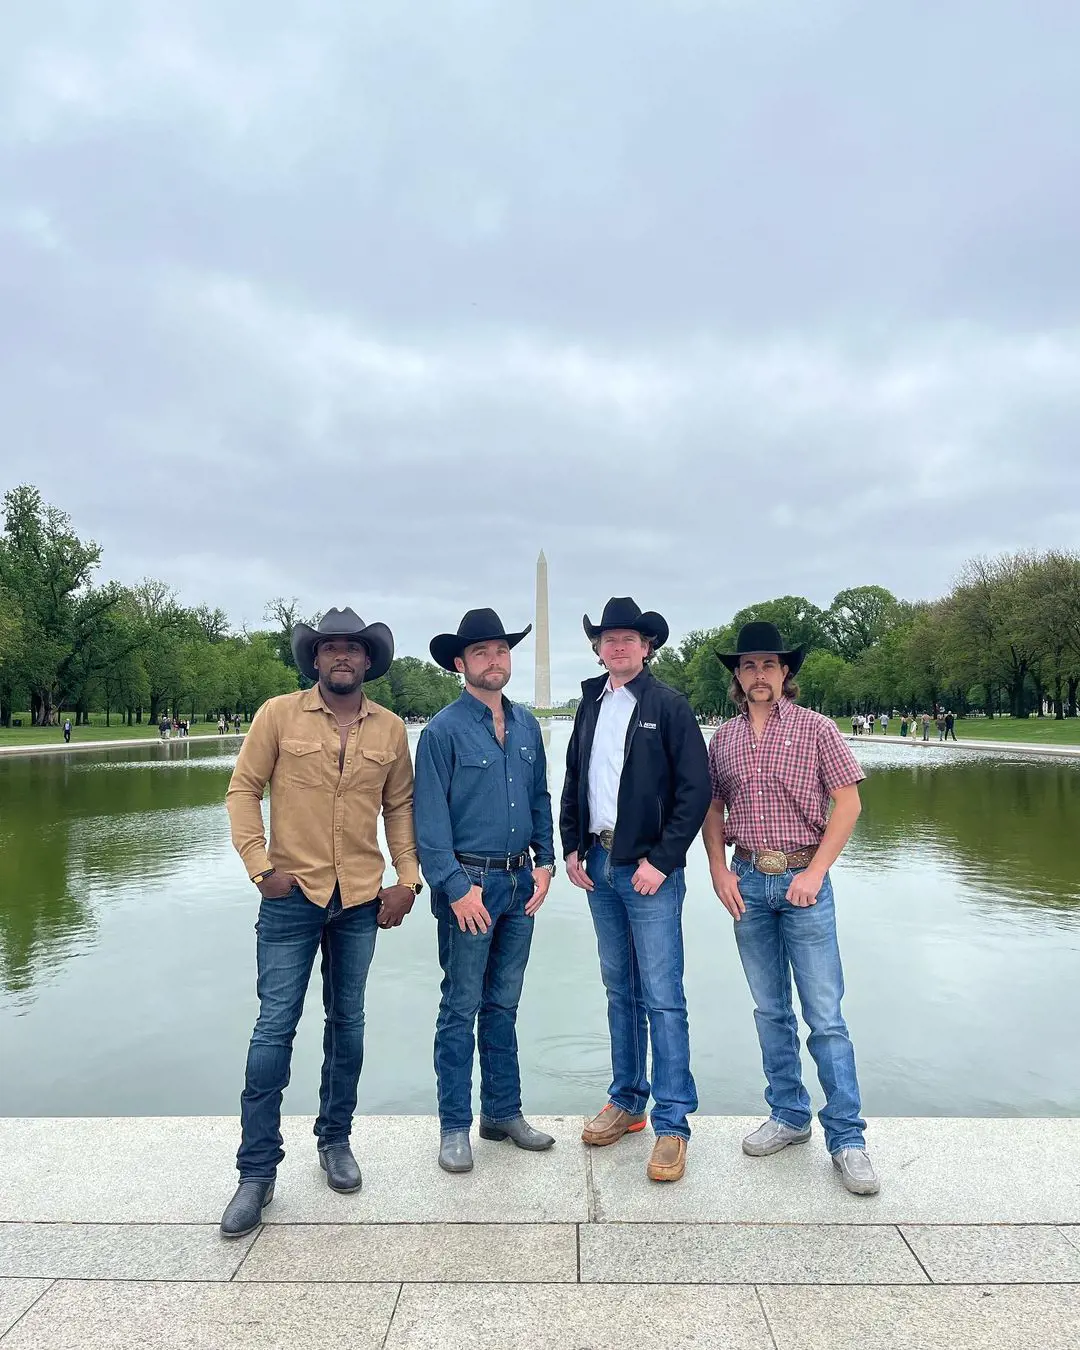 Four Farmers visited Washington, D.C during the filming of Farmer Wants a Wife